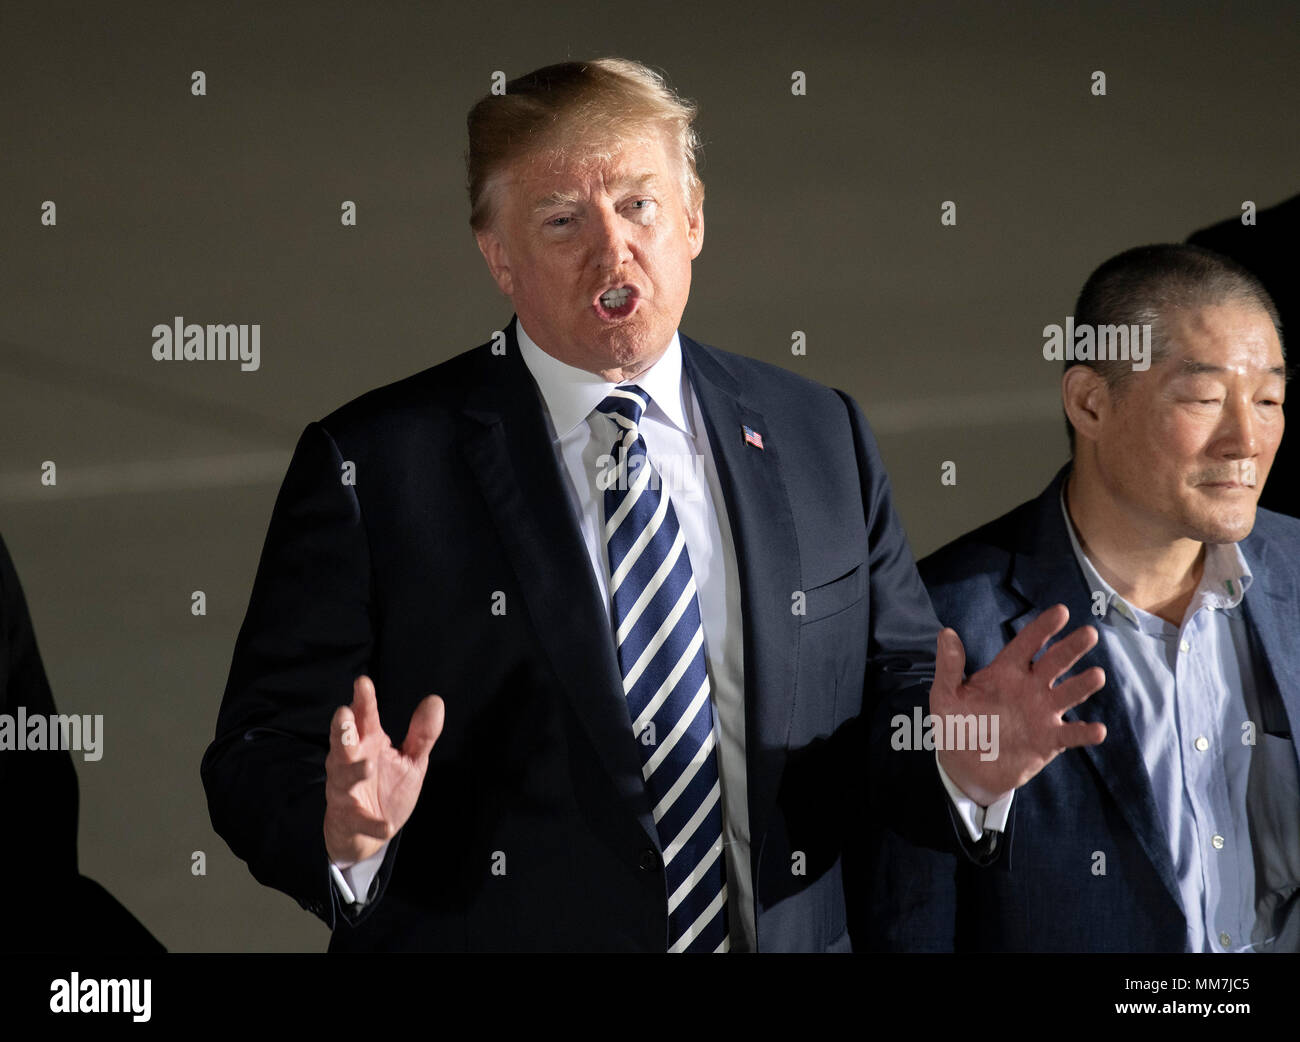 Joint Base Andrews, Maryland, USA. 10th May, 2018. United States President Donald J. Trump makes remarks to the press as he welcomes Kim Dong Chul, Kim Hak Song and Tony Kim back to the US at Joint Base Andrews in Maryland on Thursday, May 10, 2018. The three men were imprisoned in North Korea for periods ranging from one and two years. Credit: dpa picture alliance/Alamy Live News Stock Photo